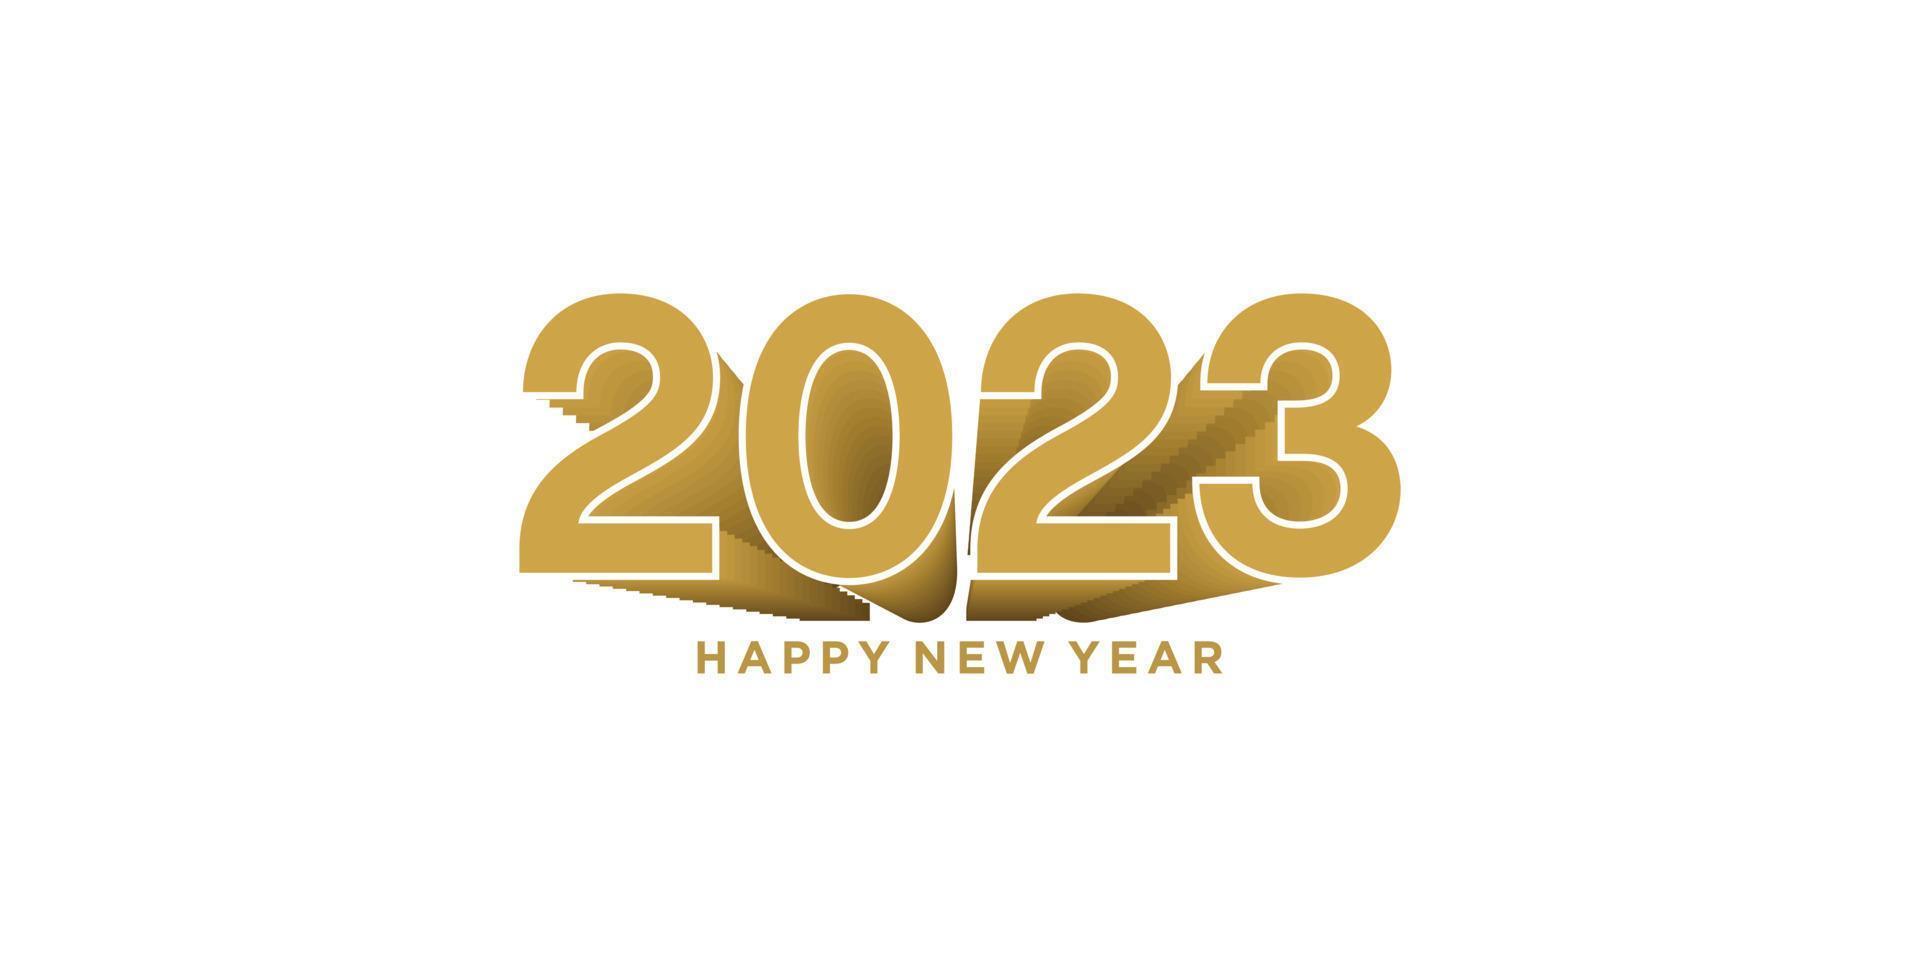 3d Design Happy New Year 2023 In Gold Color Free Vector